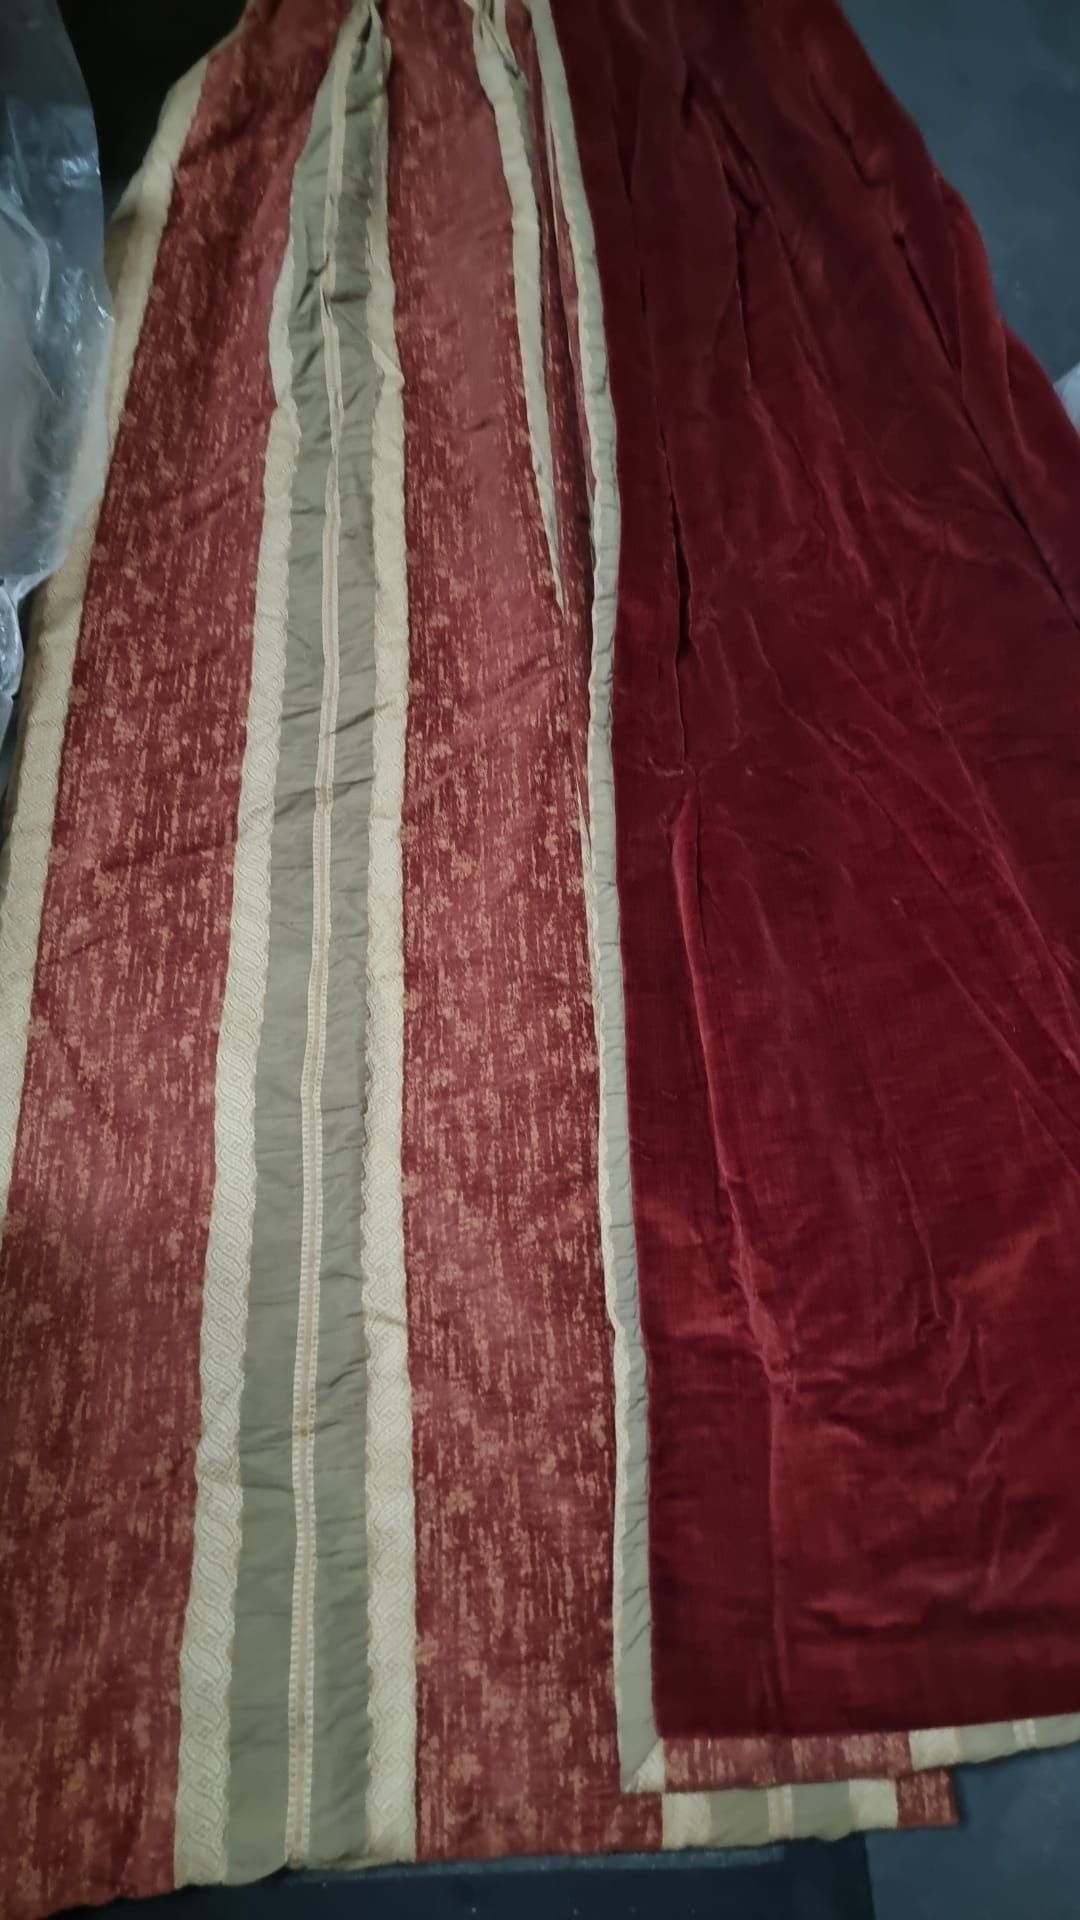 3 x very heavy cotton drapery panels fully lined and insulated in a red gold and green pattern lined - Image 2 of 3